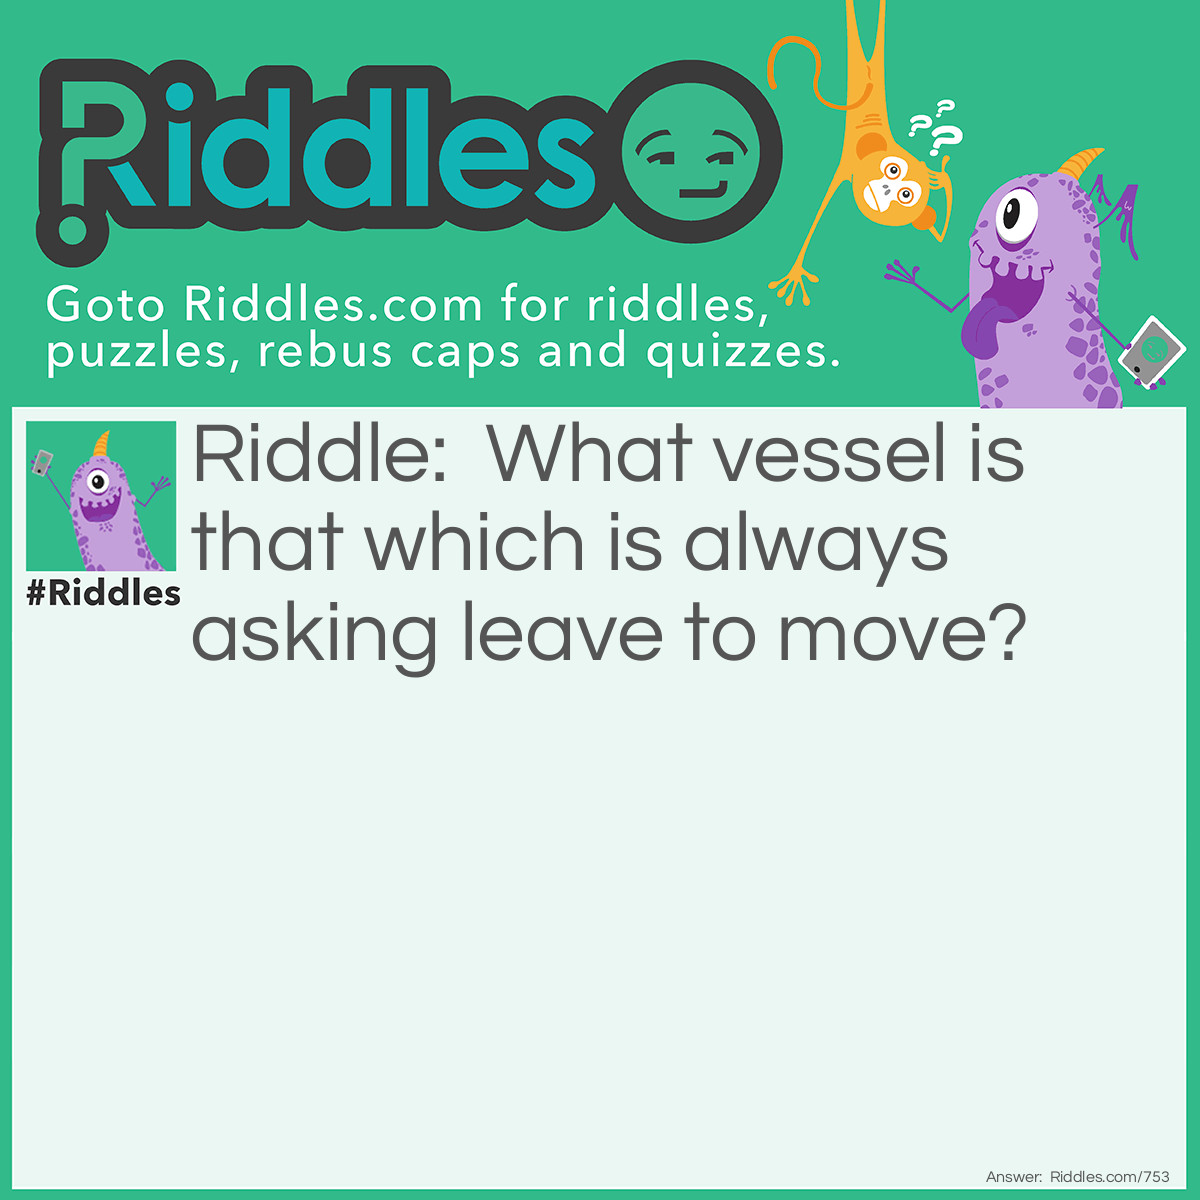 Riddle: What vessel is that which is always asking leave to move? Answer: Canister.